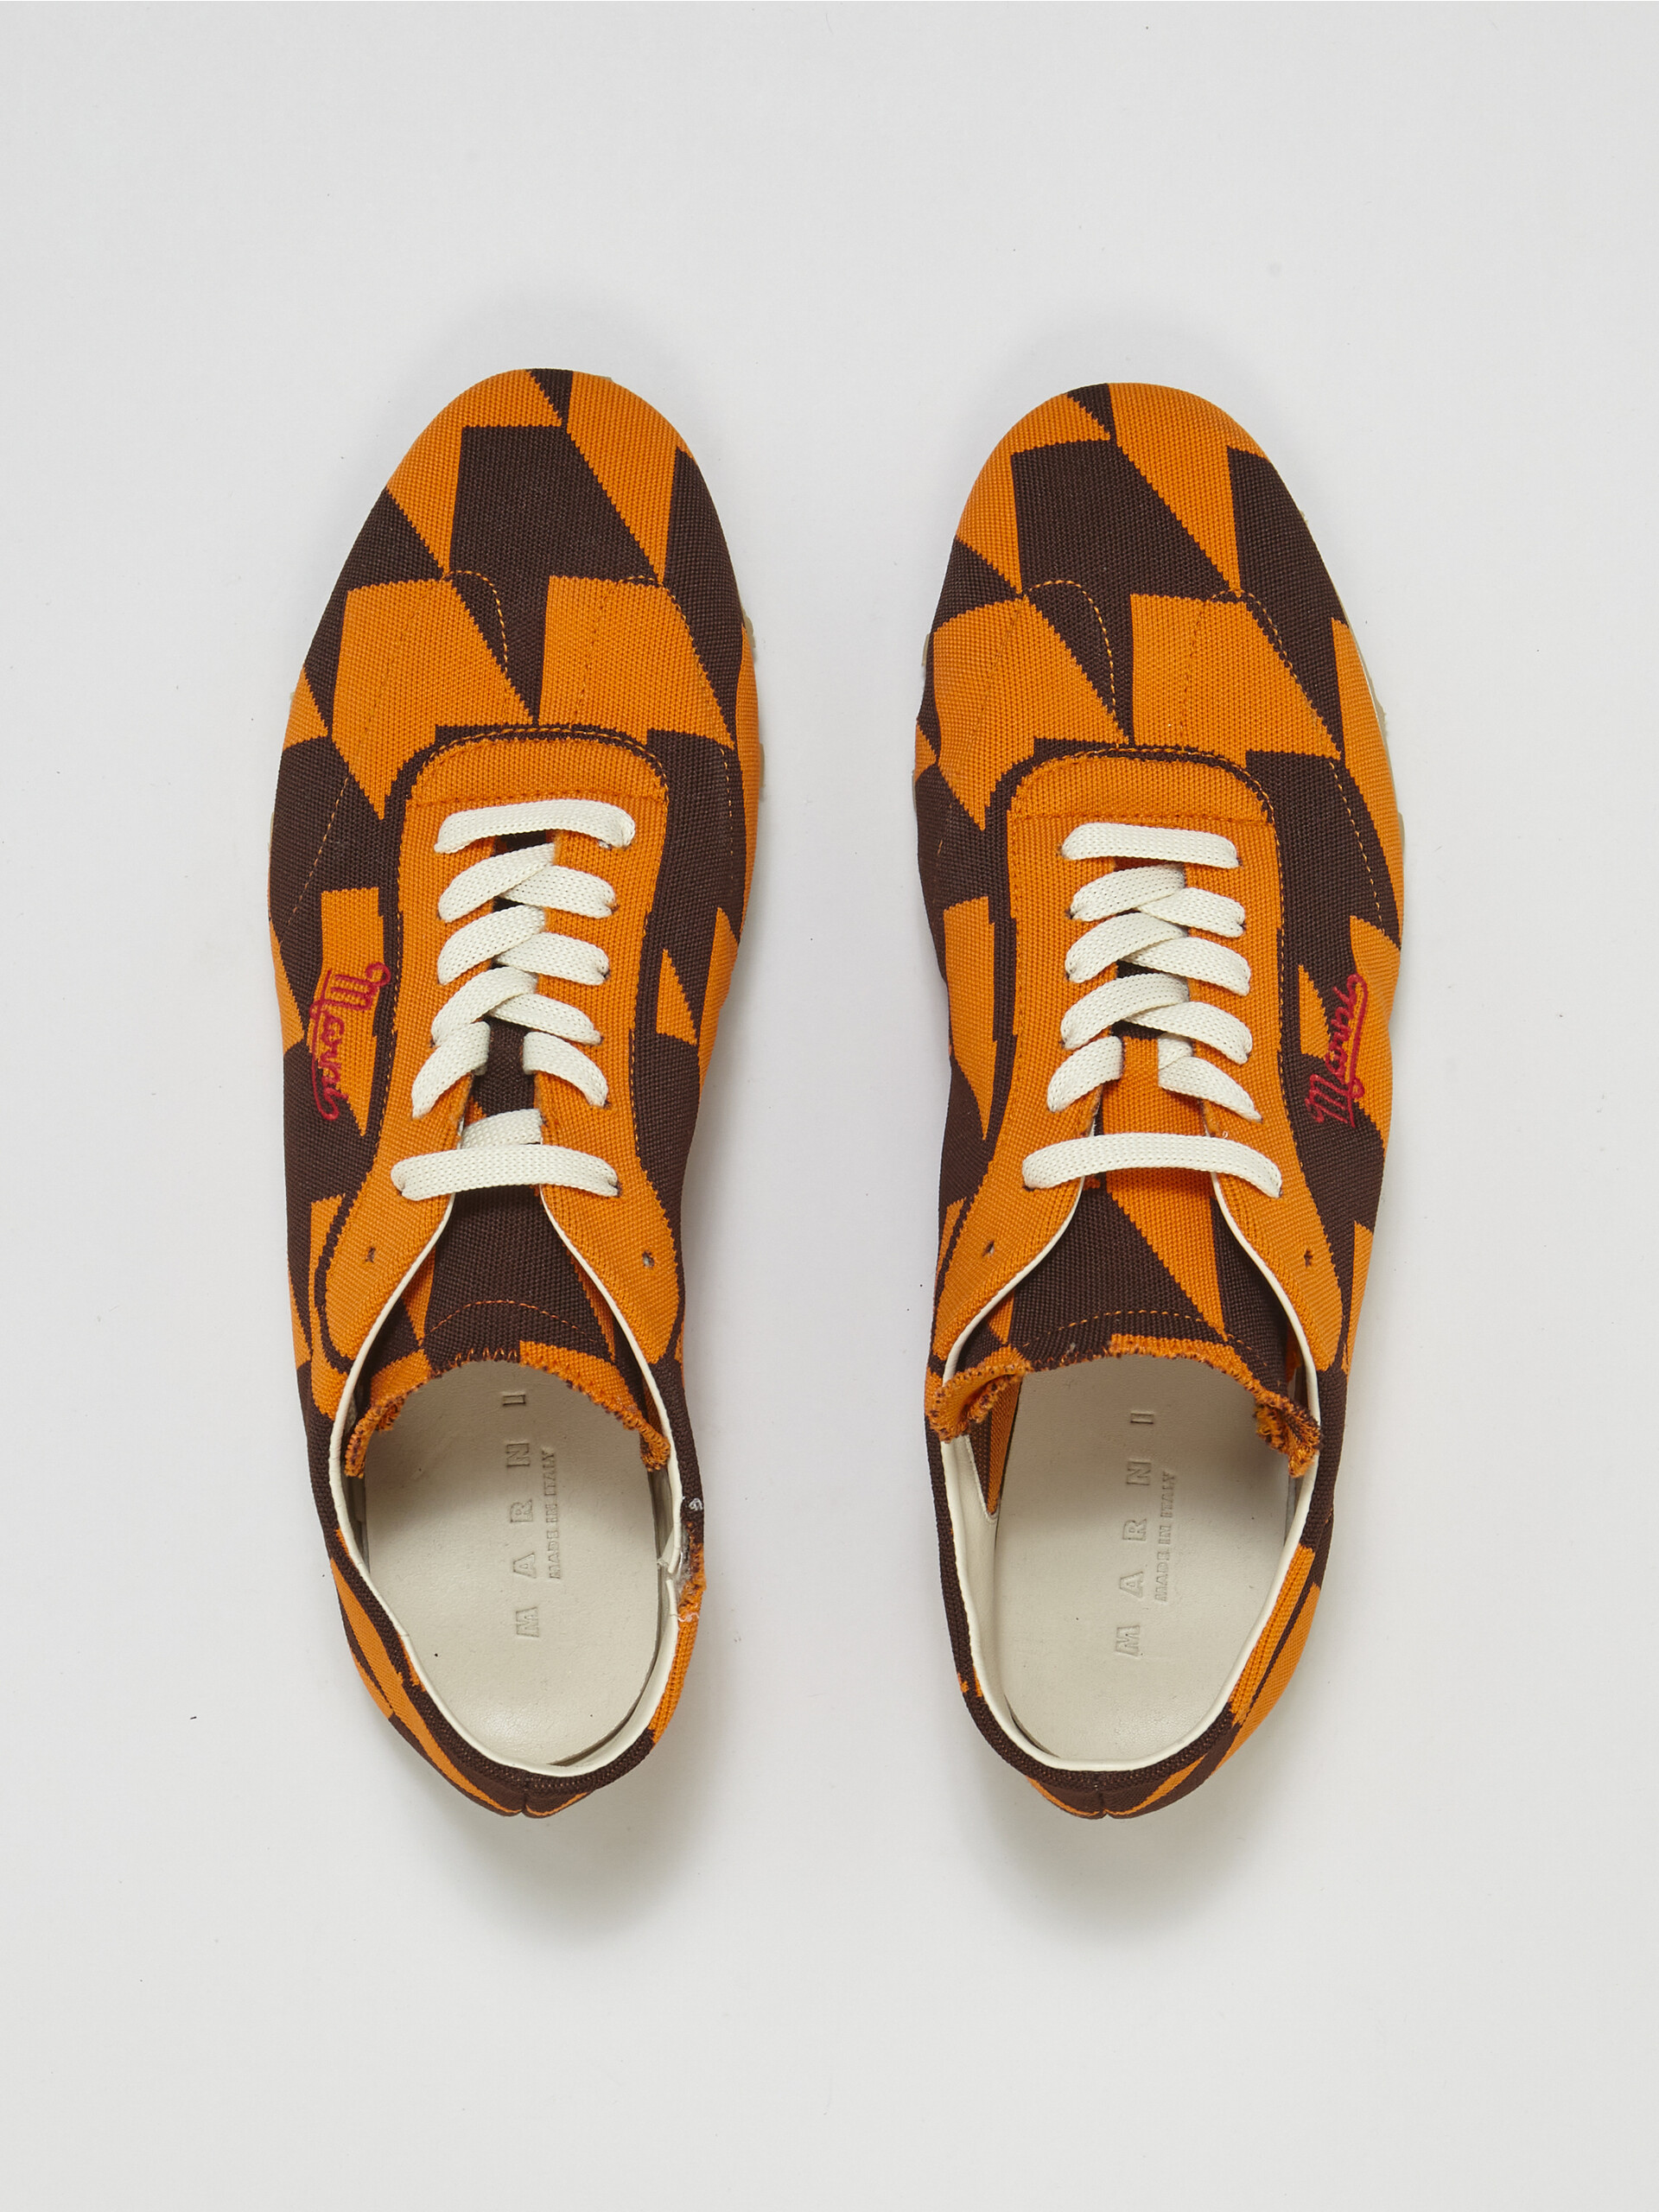 Houndstooth stretch jacquard PEBBLE sneaker - Sneakers - Image 4